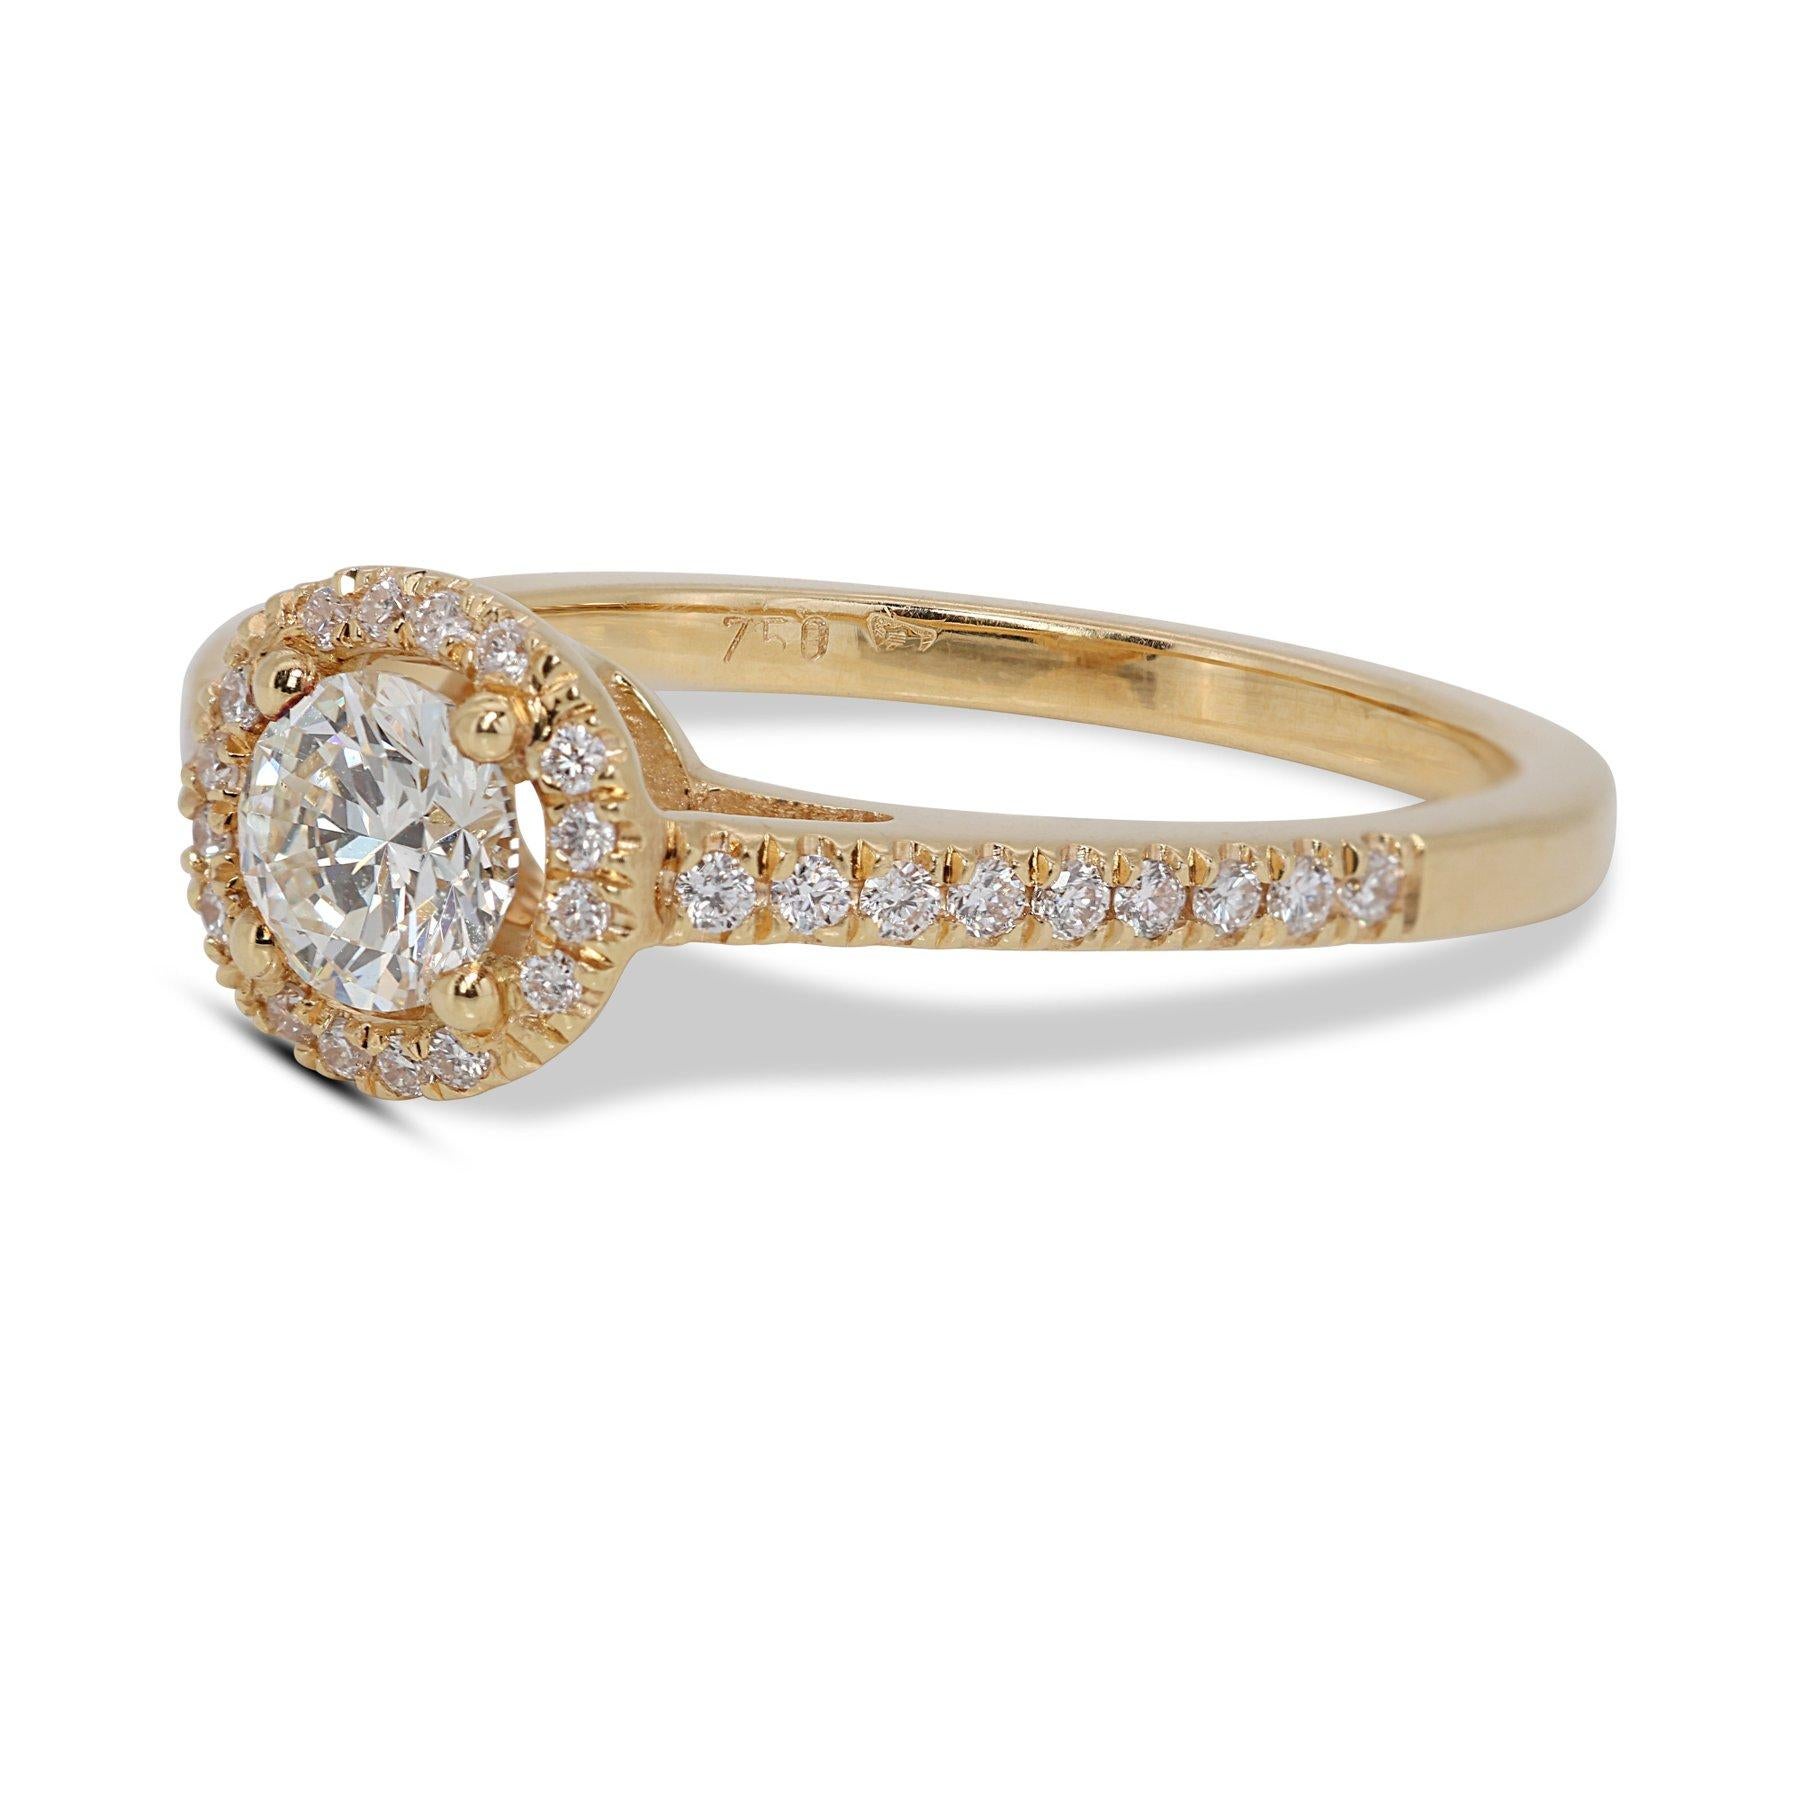 Brilliant 18K Yellow Gold Natural Diamond Halo Ring w/0.93 Carat - GIA Certified

A captivating diamond halo ring featuring a 0.70 carat center stone with a brilliant cut. This dazzling centerpiece is complemented by a sparkling halo of 34 round